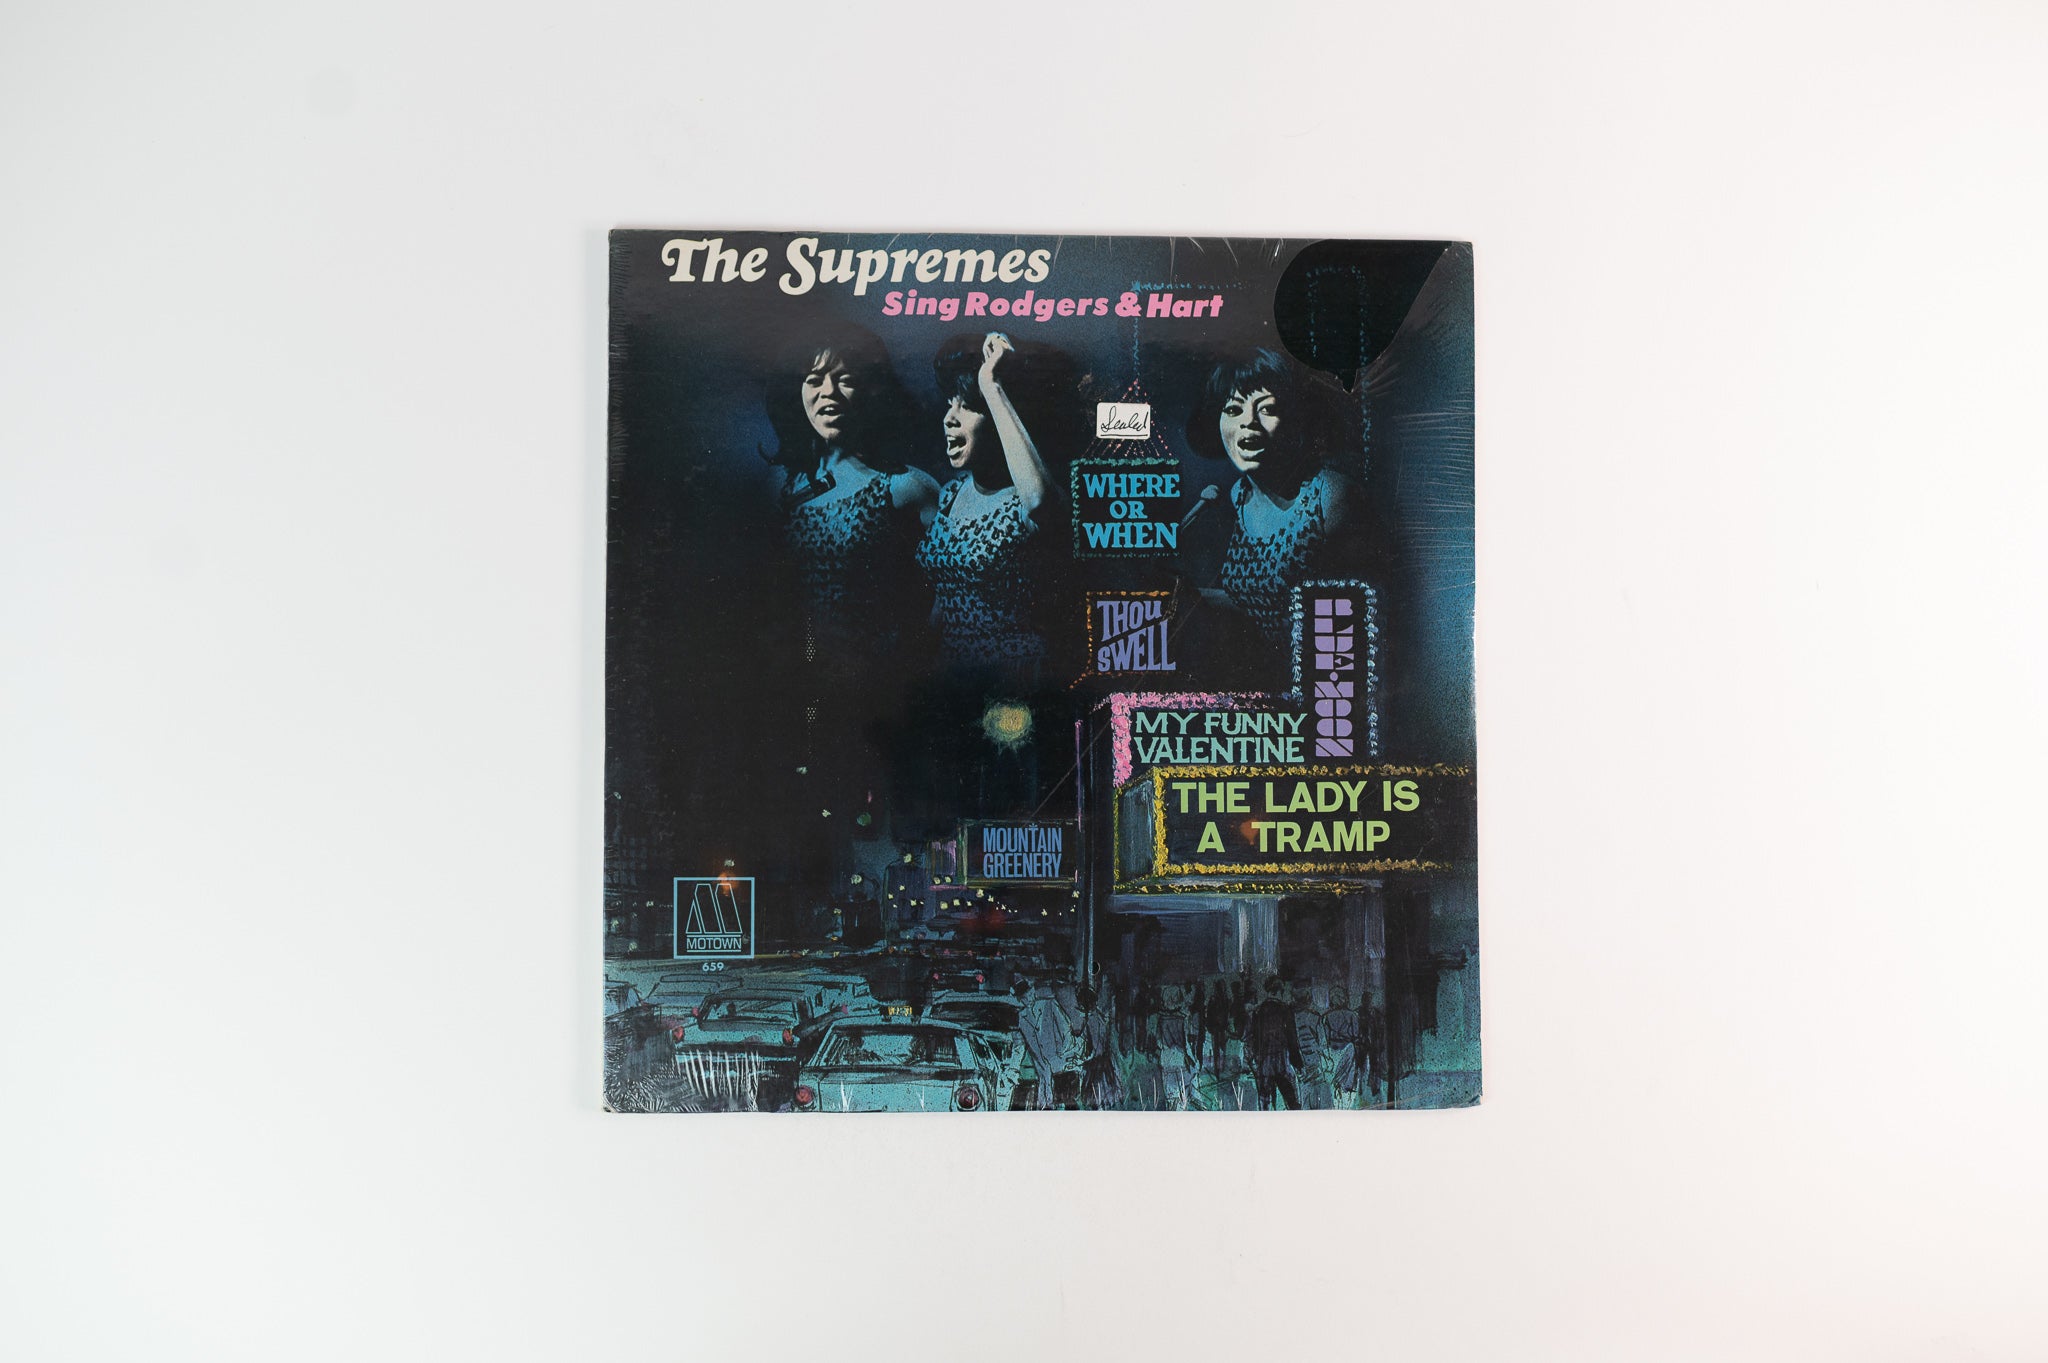 The Supremes - The Supremes Sing Rodgers & Hart on Motown Sealed